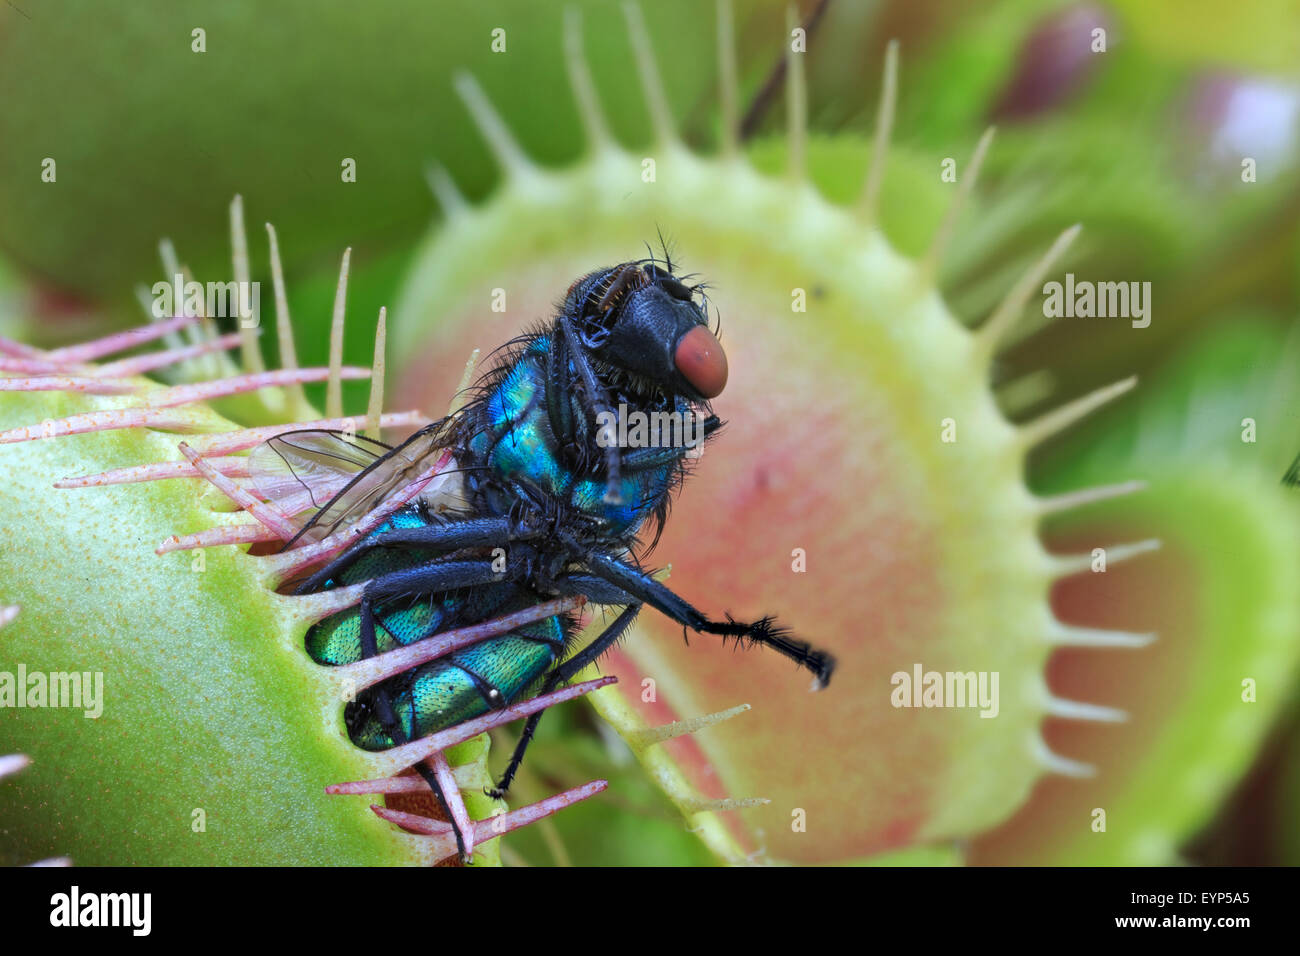 Greenbottle fly caught in a Venus flytrap Stock Photo